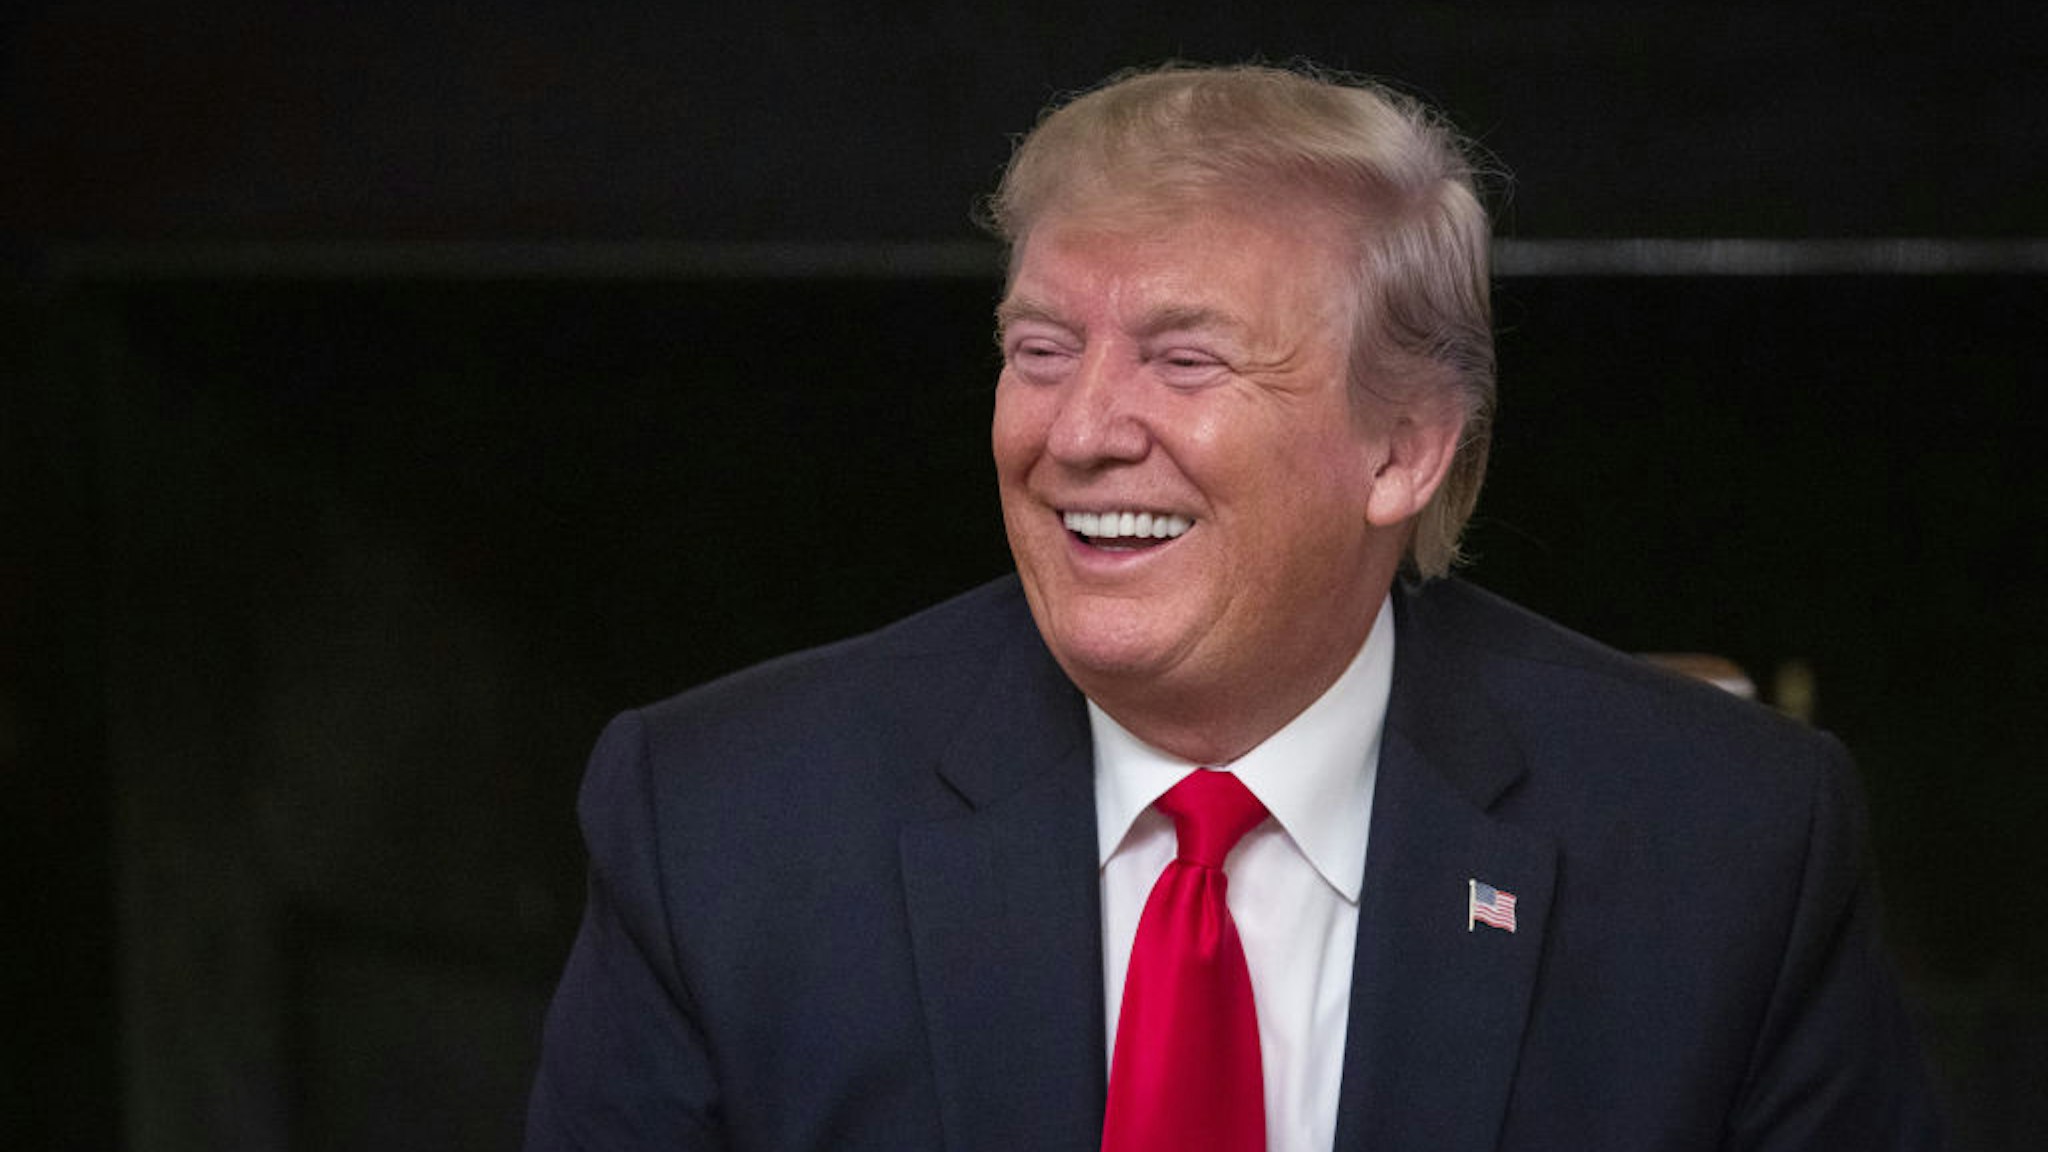 U.S. President Donald Trump laughs during the "Pledge to America's Workers" event at the White House in Washington, D.C., U.S., on Thursday, July 25, 2019.